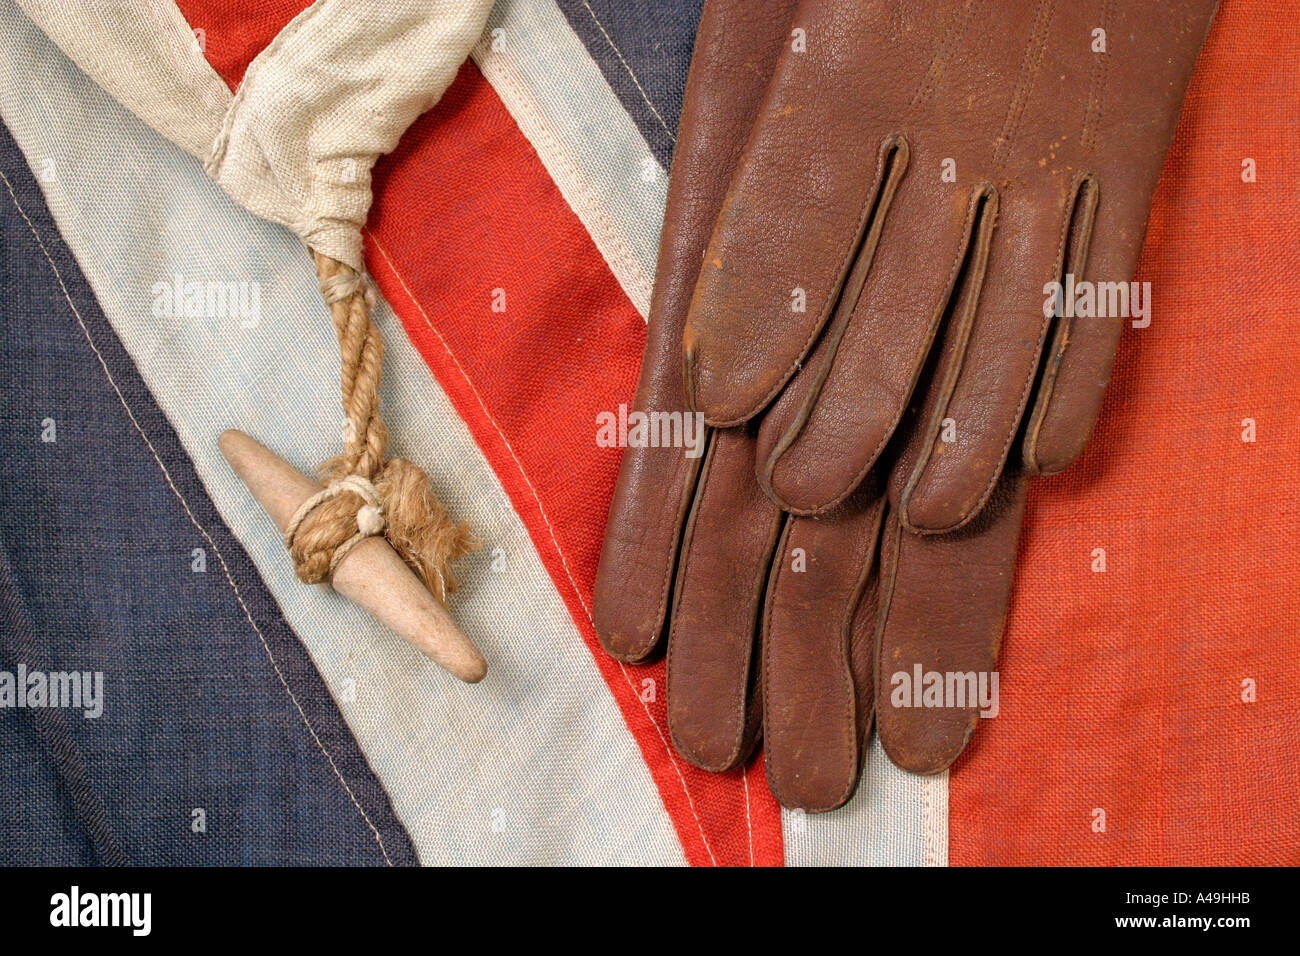 union jack british flag with brown leather gloves Stock Photo